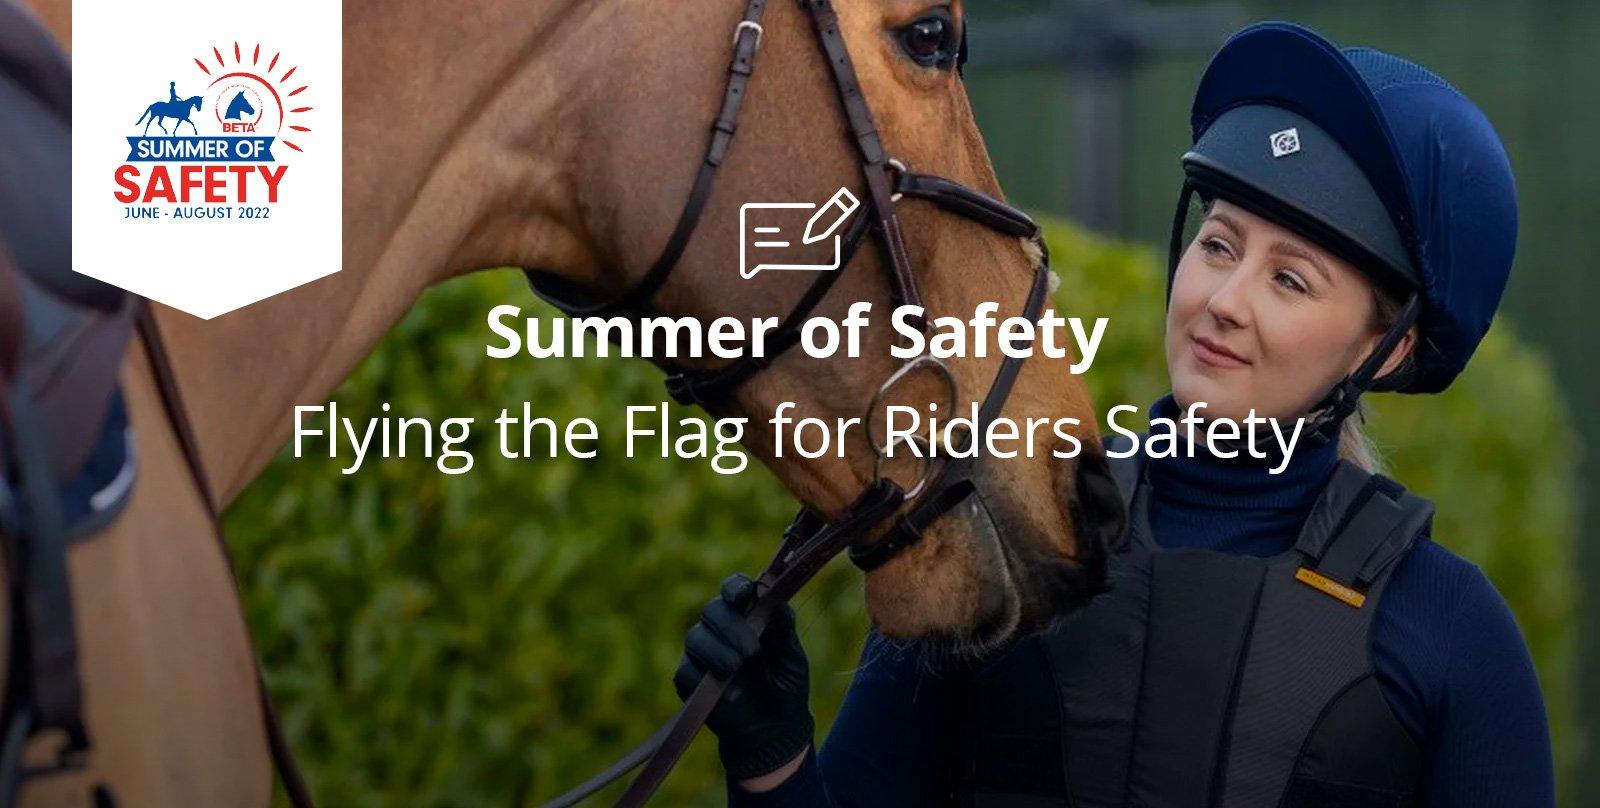 Summer Of Safety > READ MORE